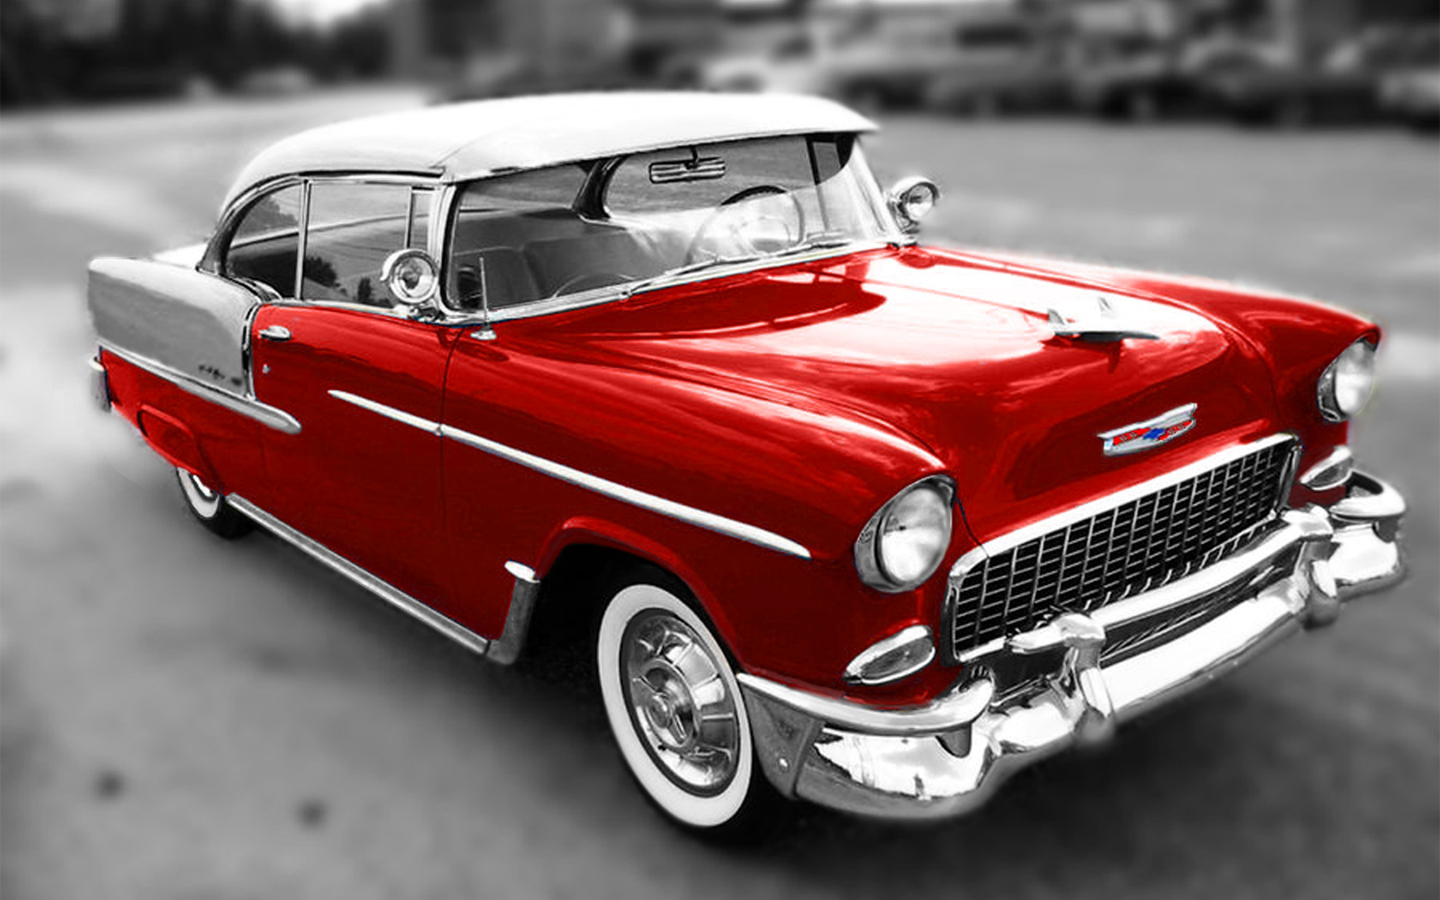 Amazing Chevrolet Bel Air Pictures & Backgrounds